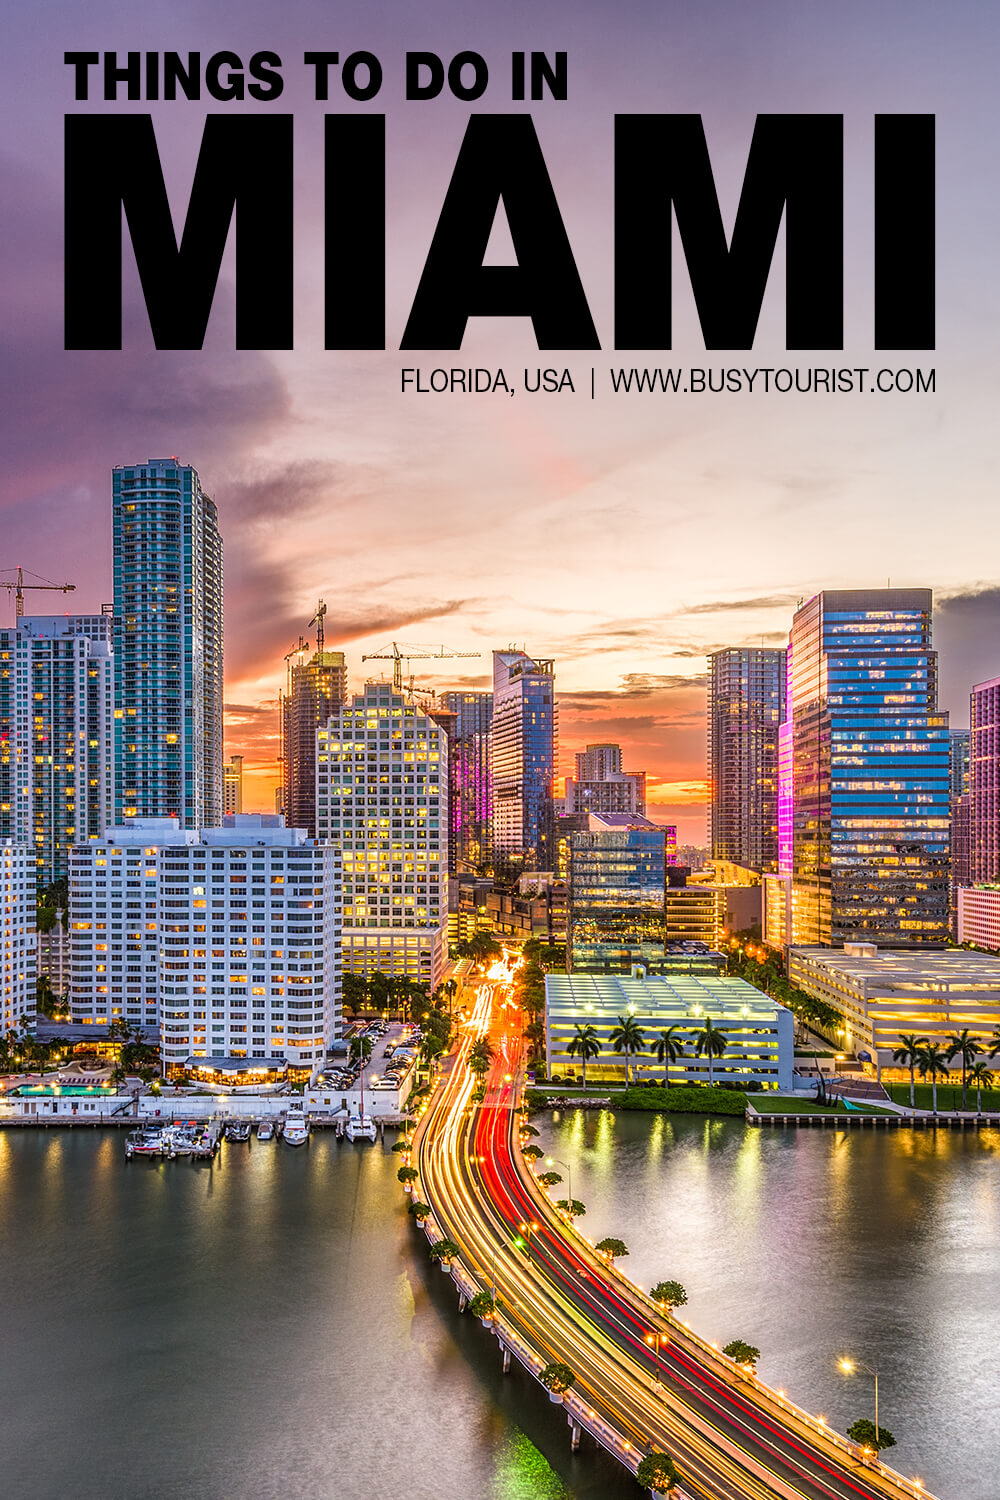 45 Best & Fun Things To Do In Miami (Florida) Attractions & Activities